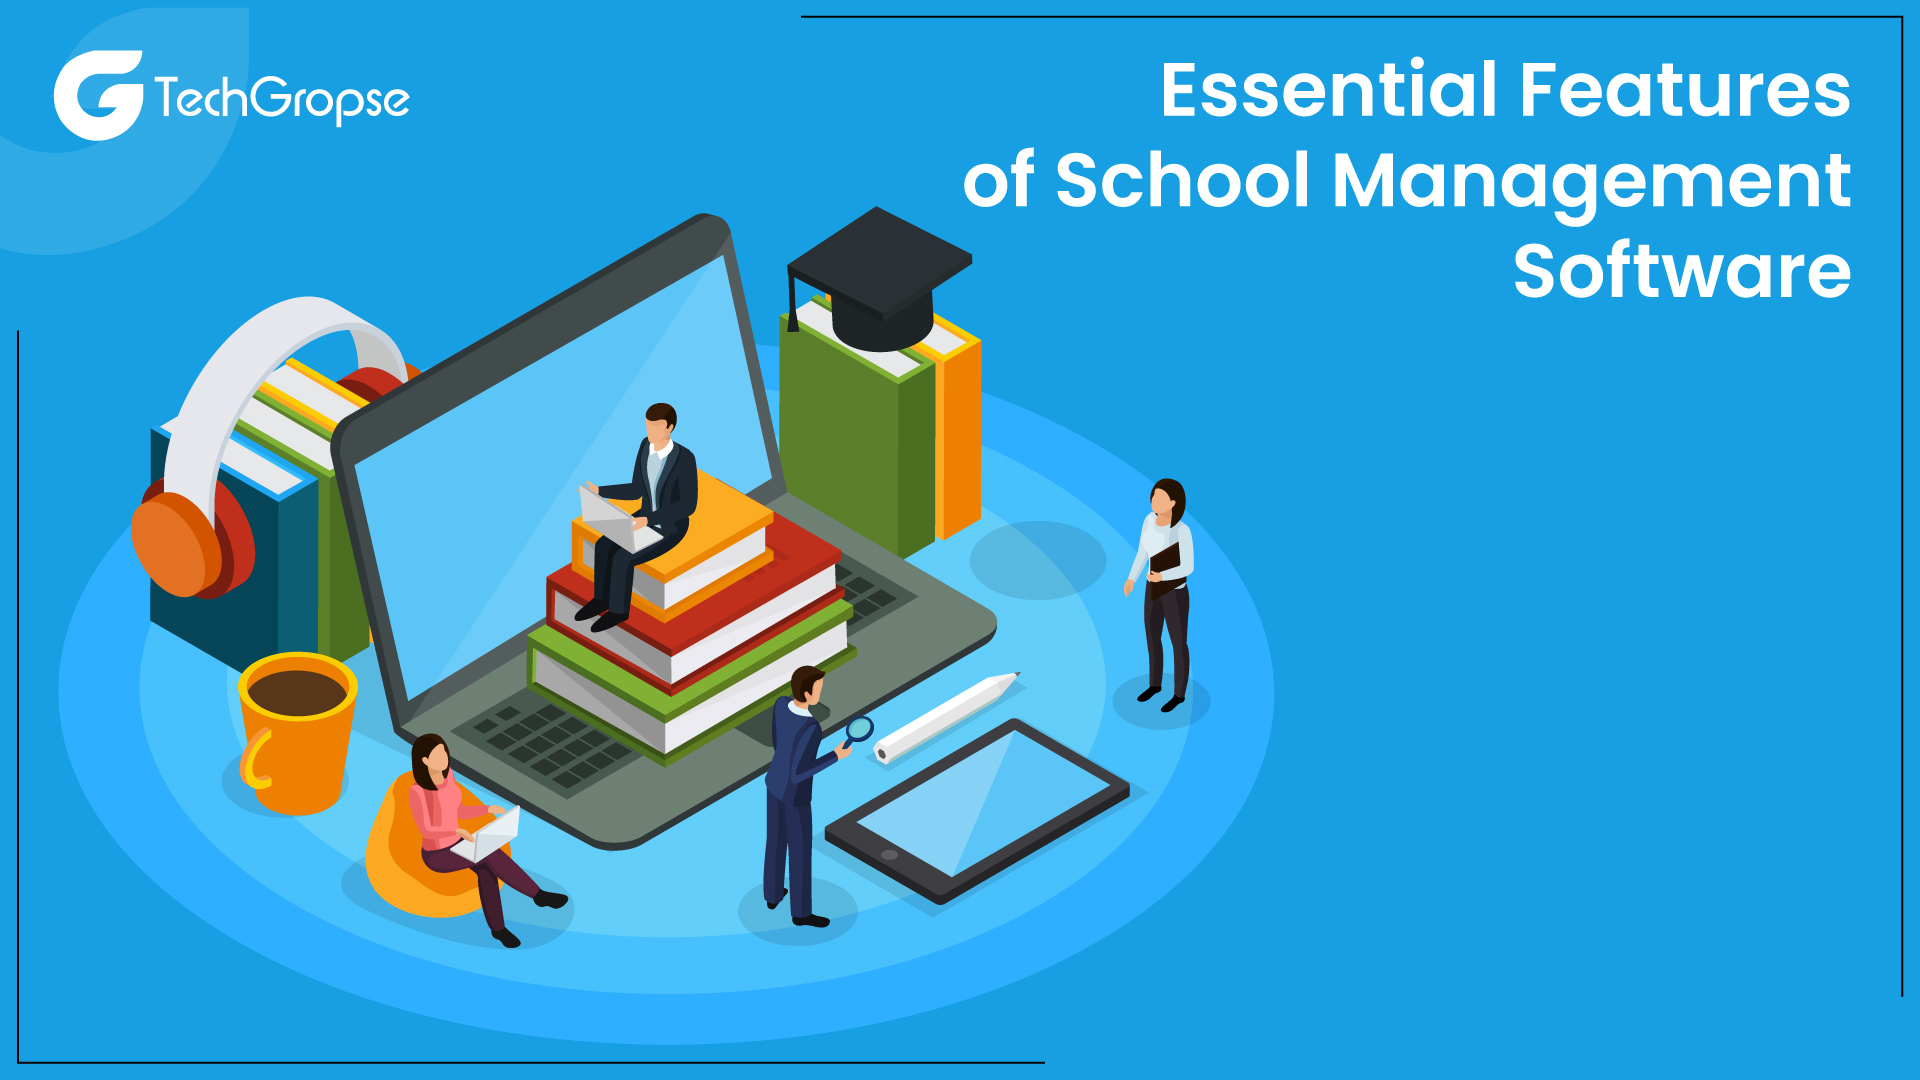 Essential Features of School Management Software